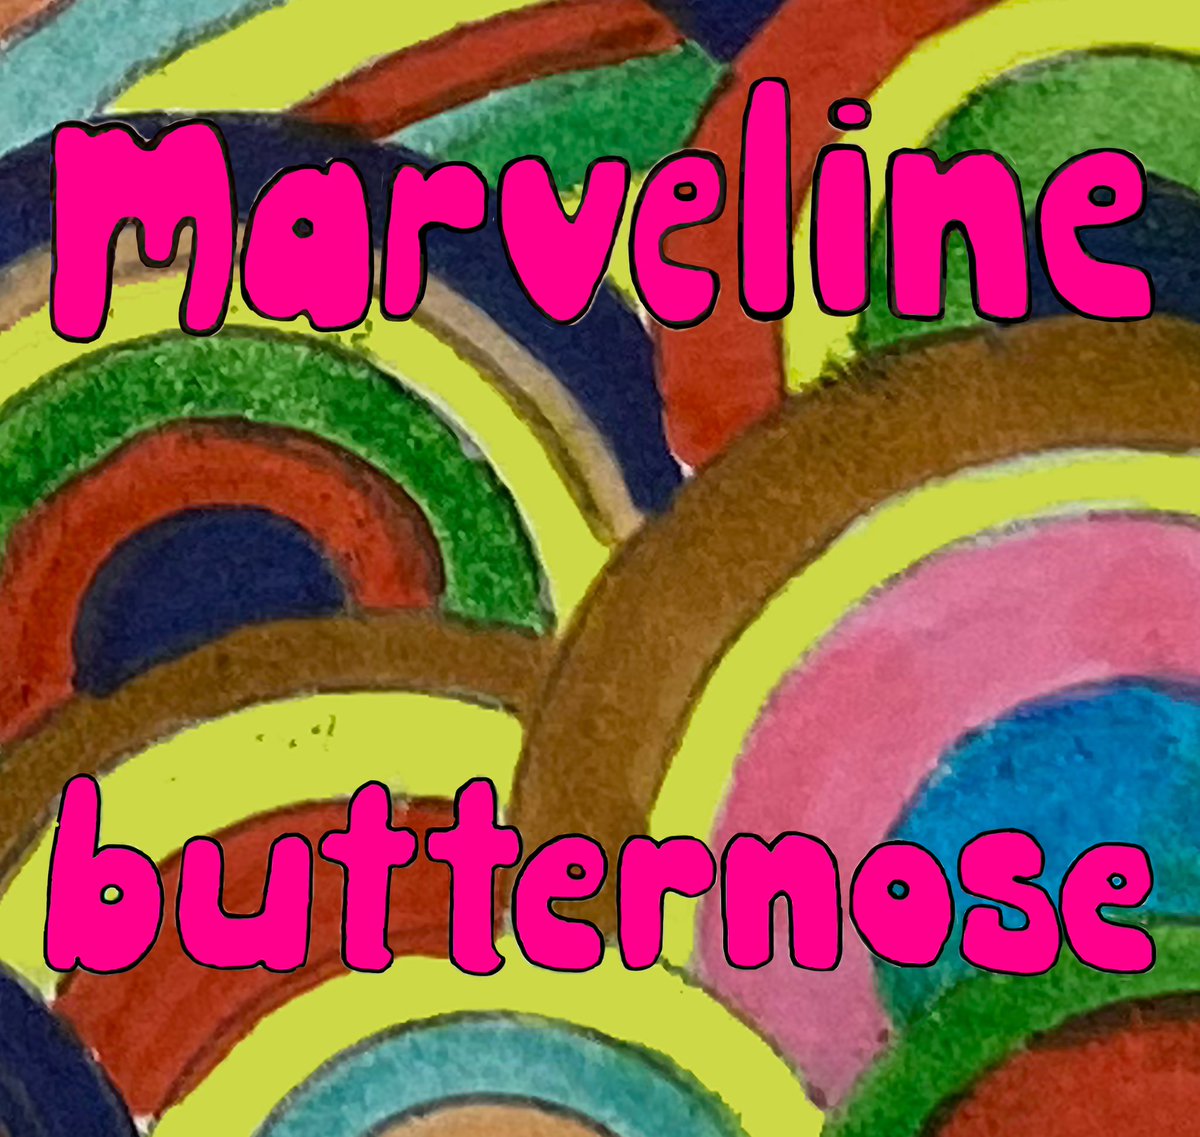 It’s a newie - first for quite a while. Who or what is Butternose? marveline.bandcamp.com/track/butterno…